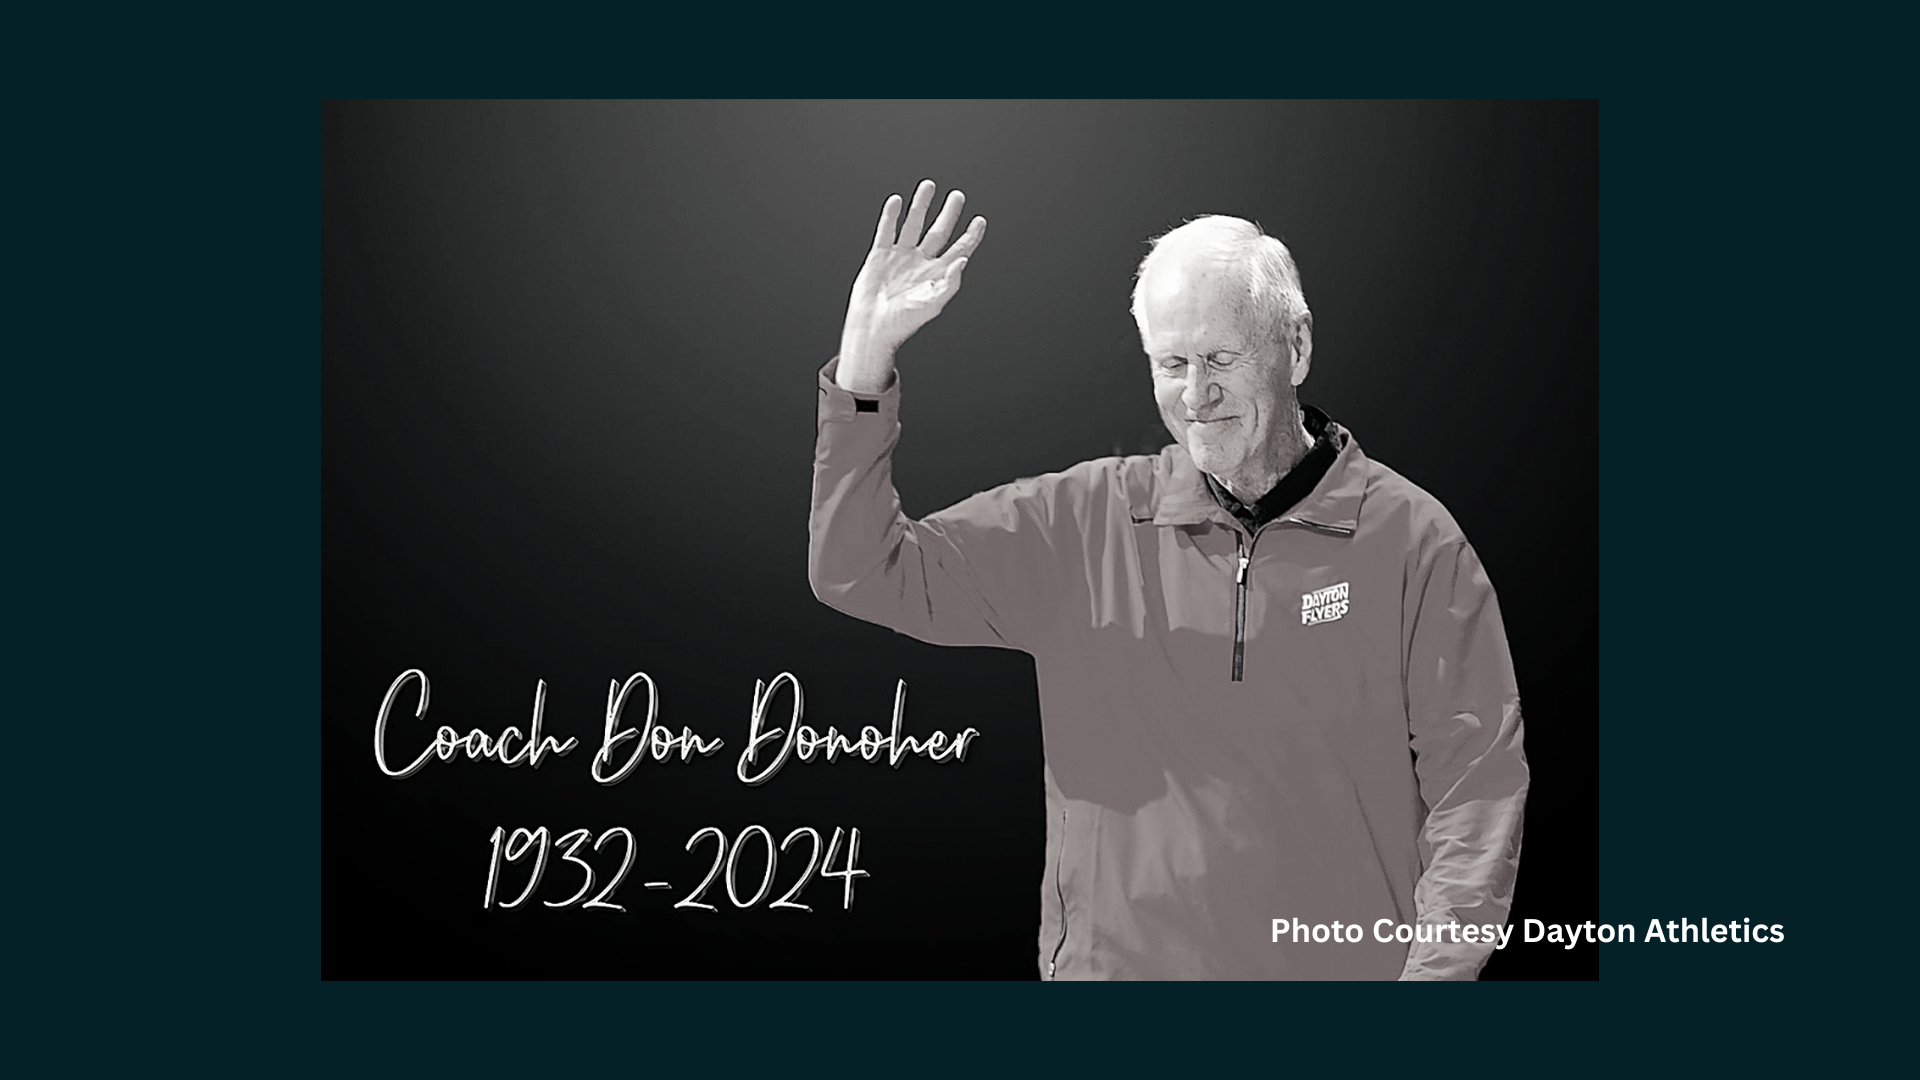 Remembering Don Donoher: Legendary Dayton Basketball Coach and Player Dies at 92